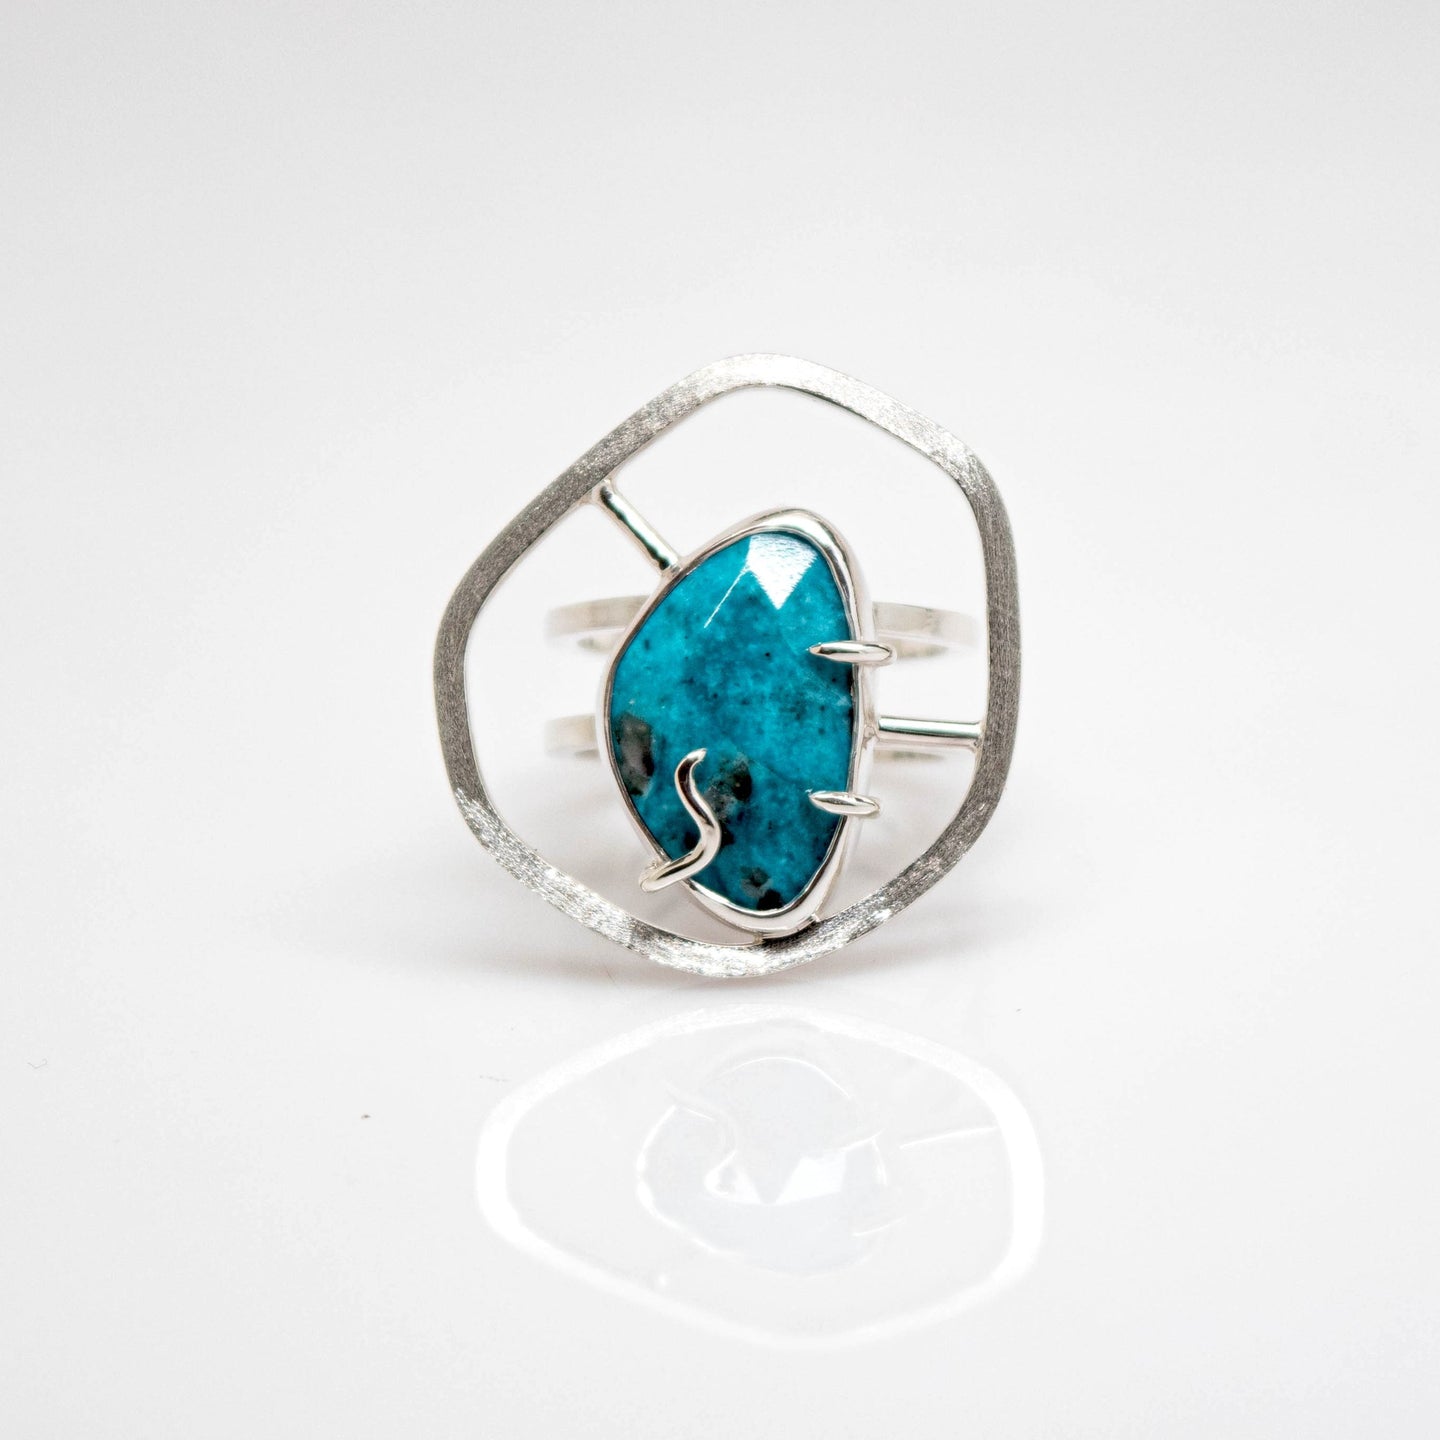 Tranquility Ring - Sterling Silver, American Turquoise - TIN HAUS